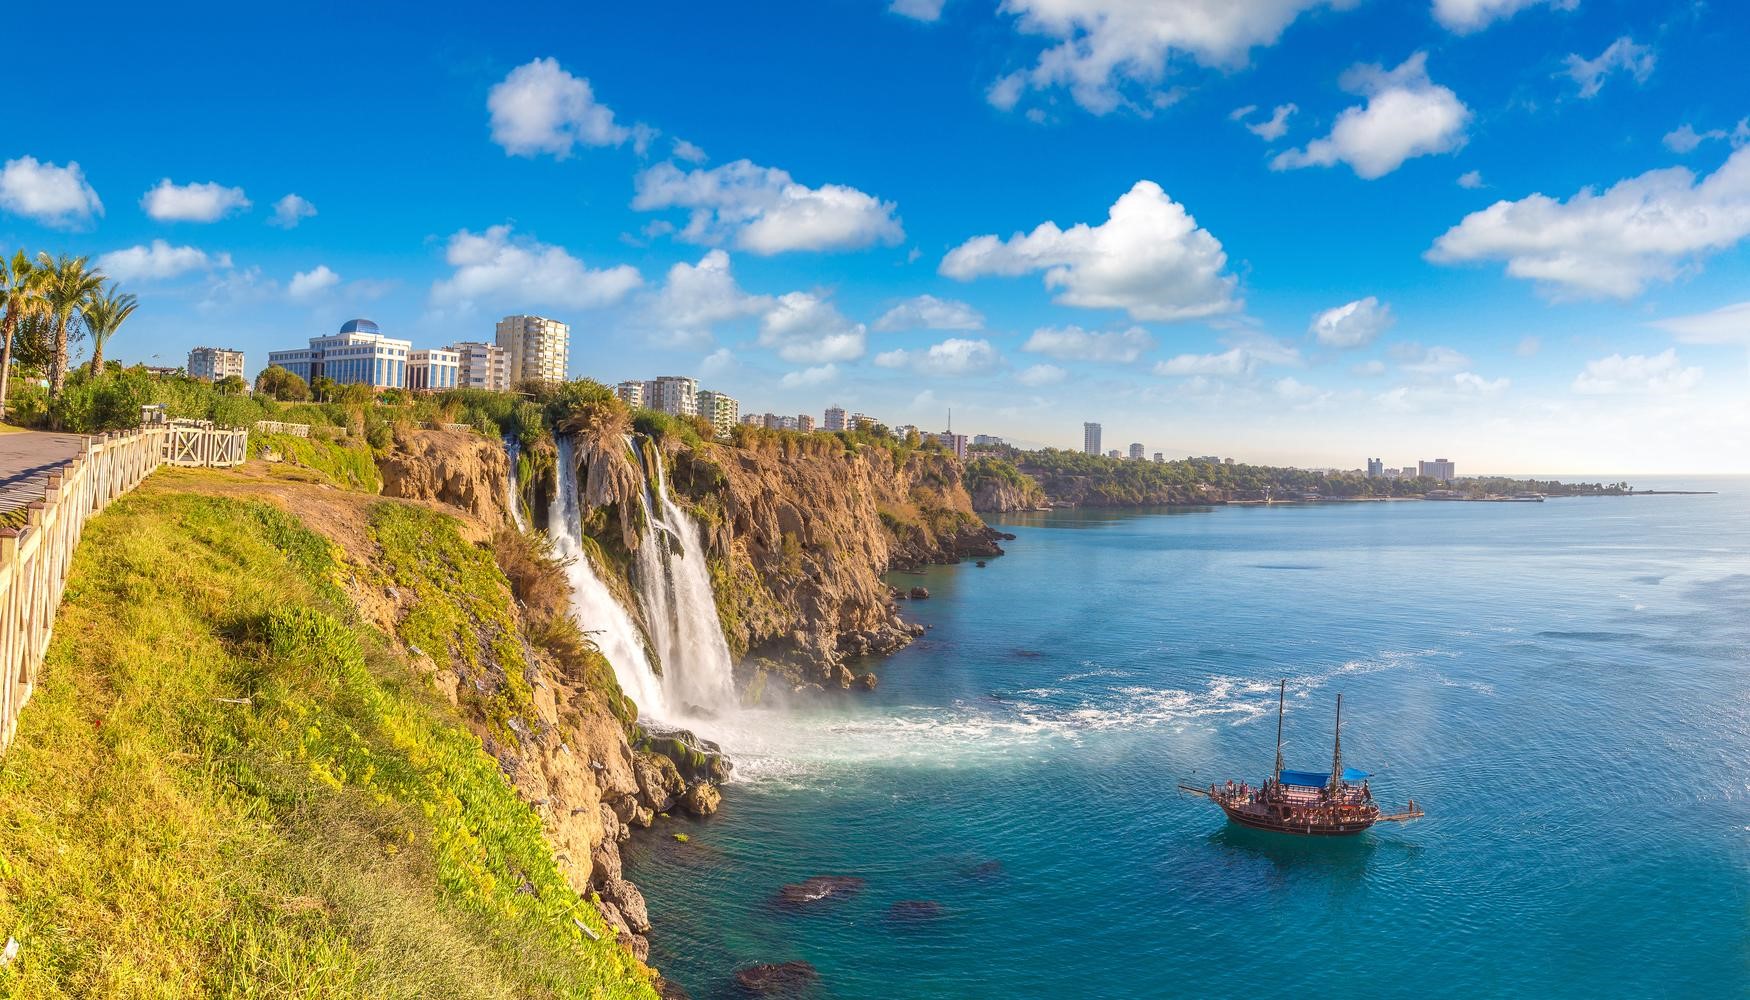 Antalya is a city where sea, sun, history and nature are perfectly integrated in harmony.